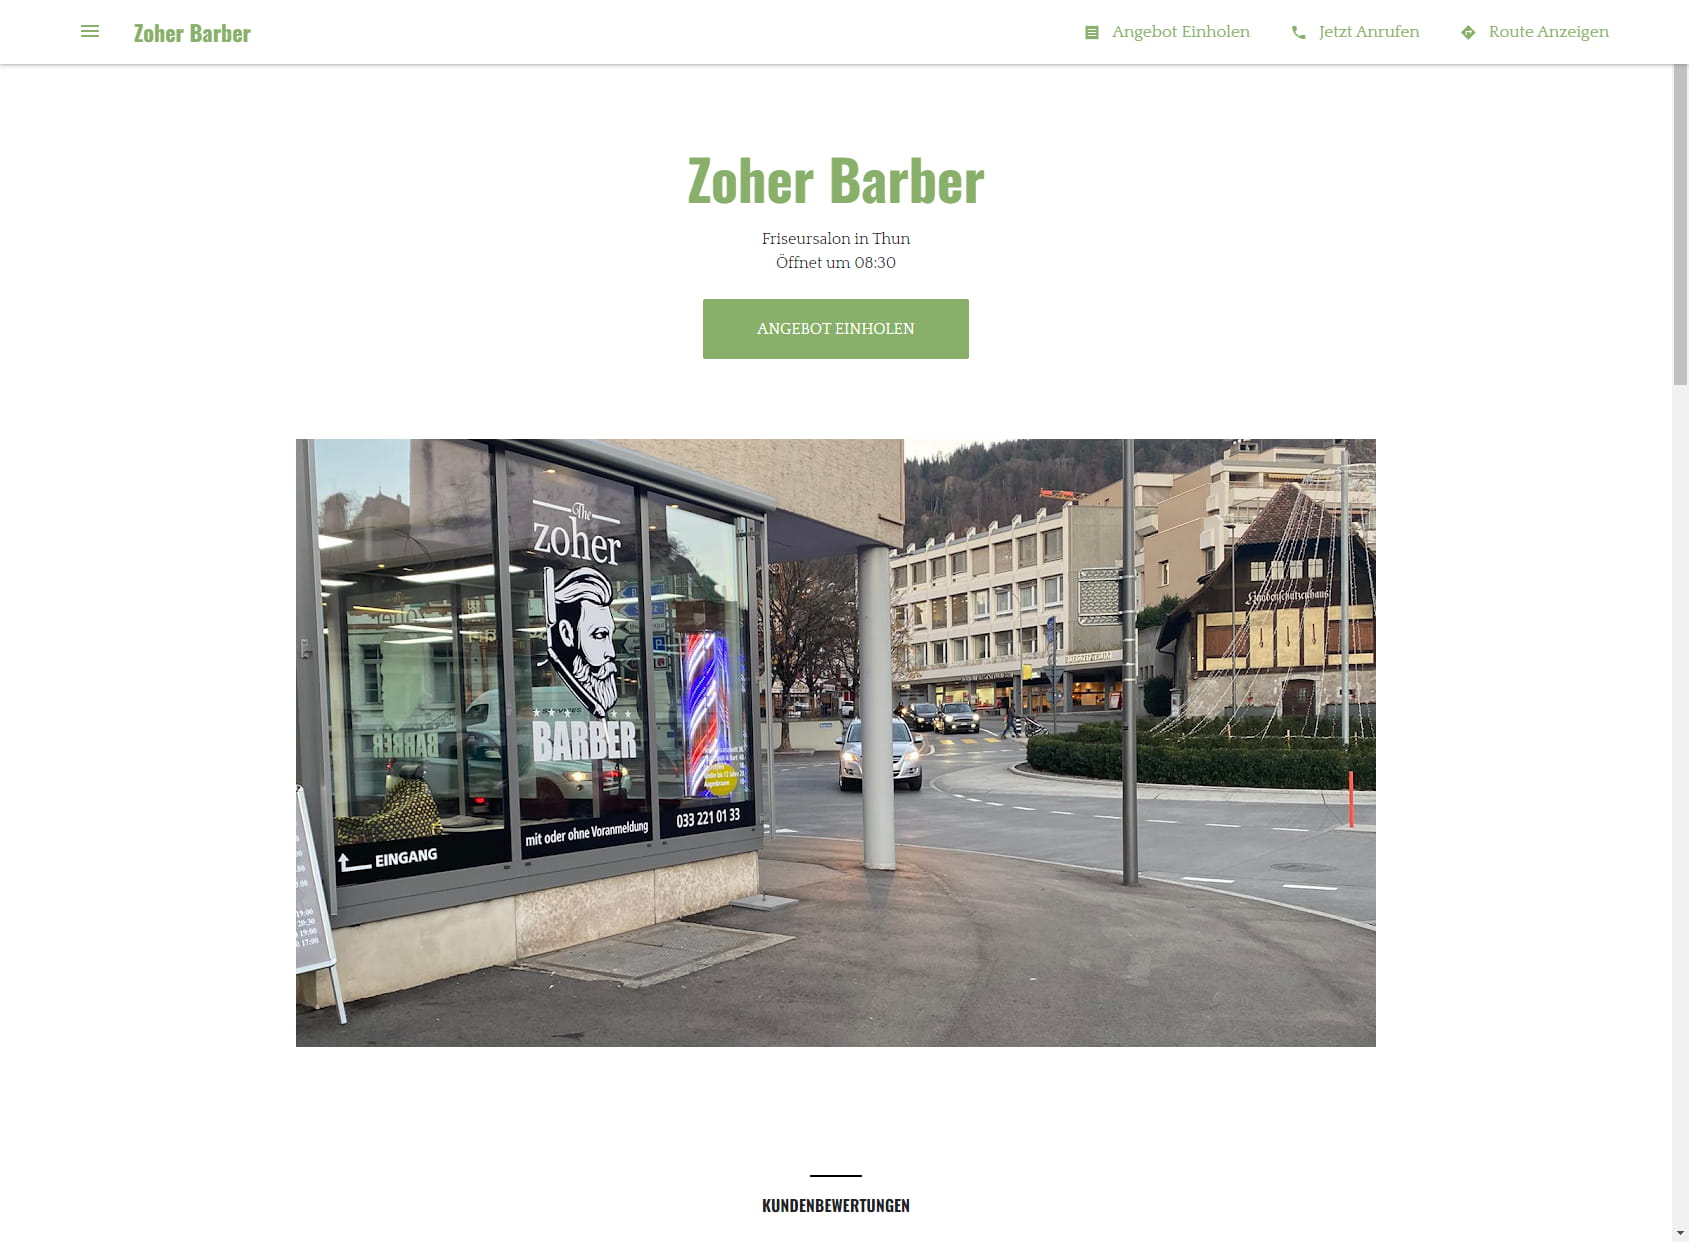 Zoher Barber